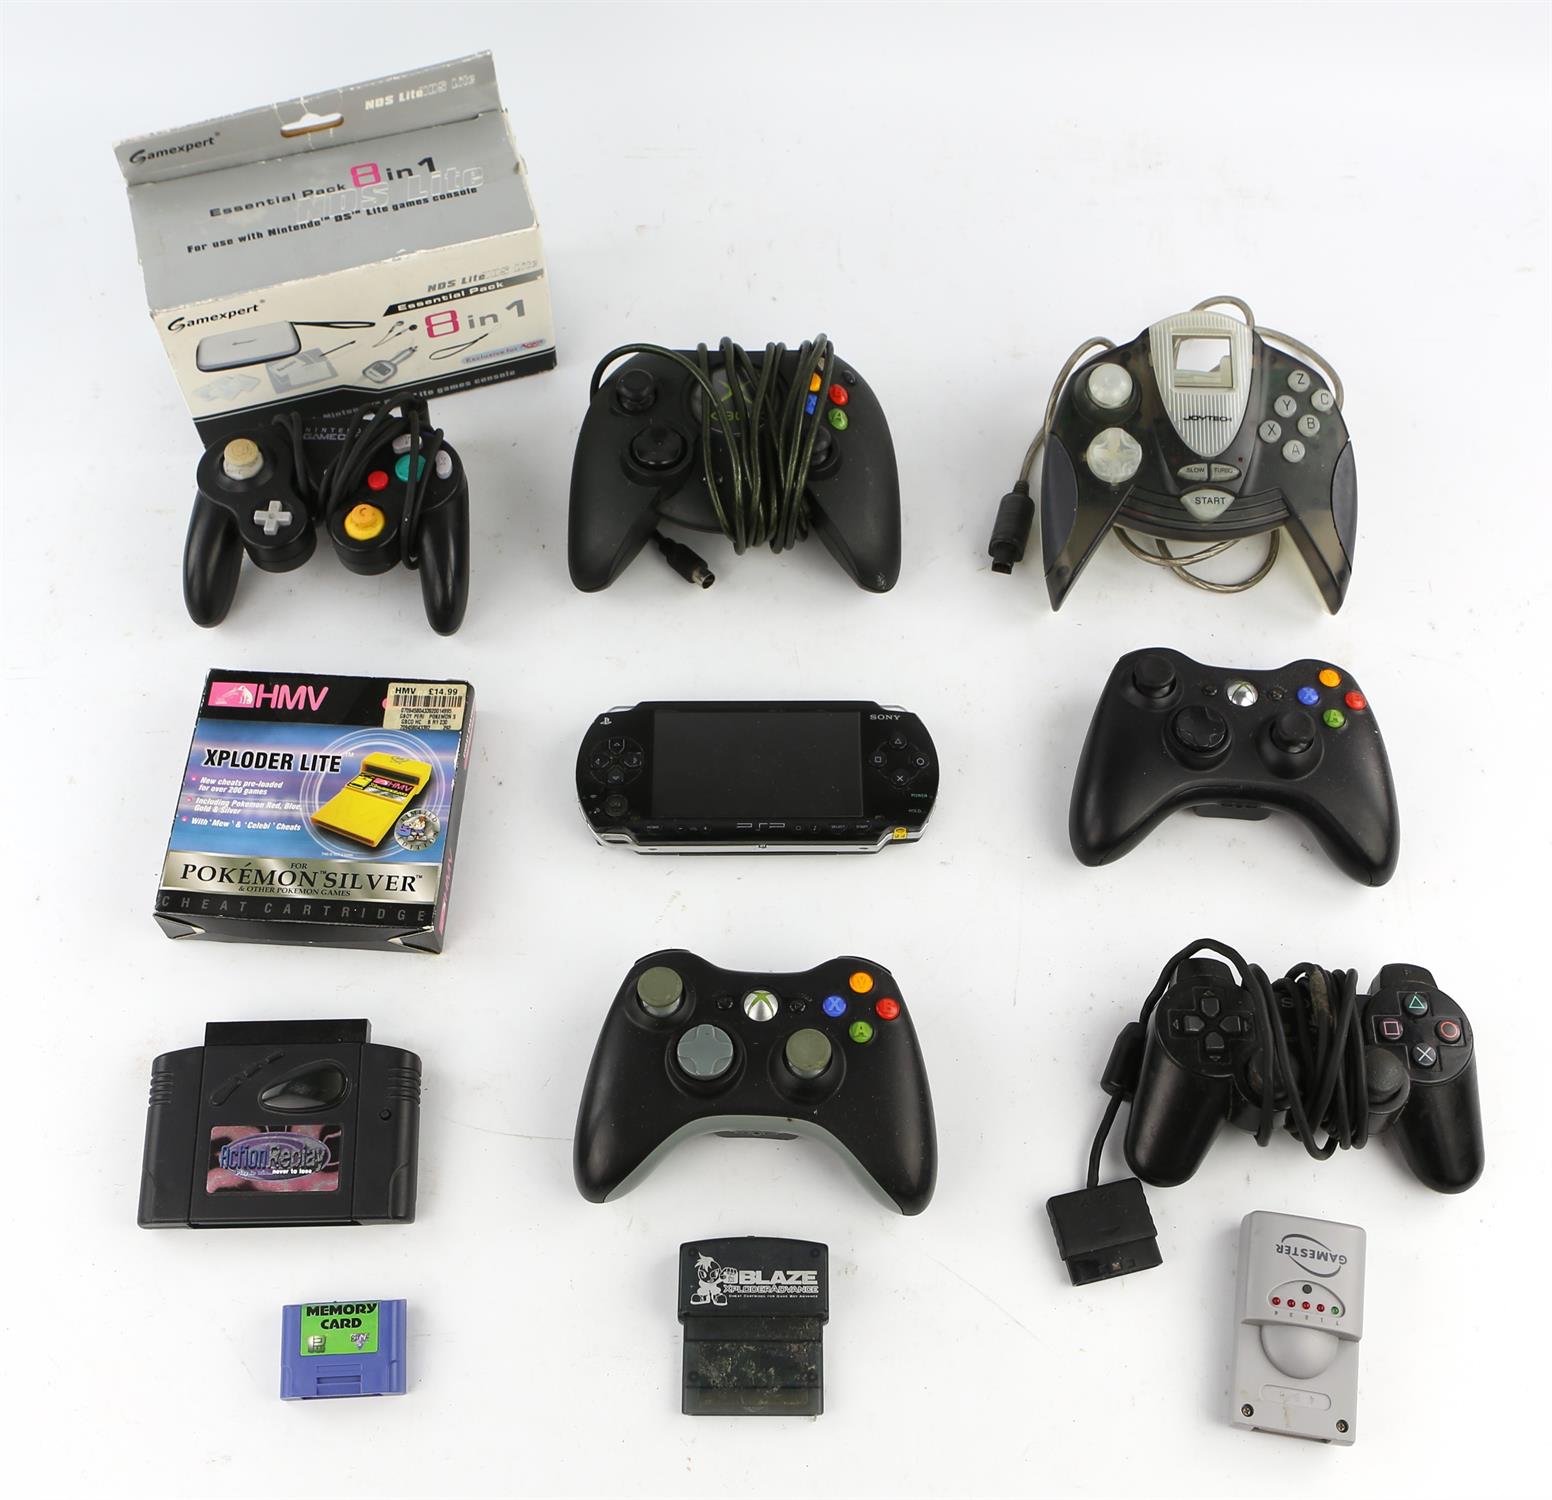 An assortment of controllers, accessories and gaming paraphernalia